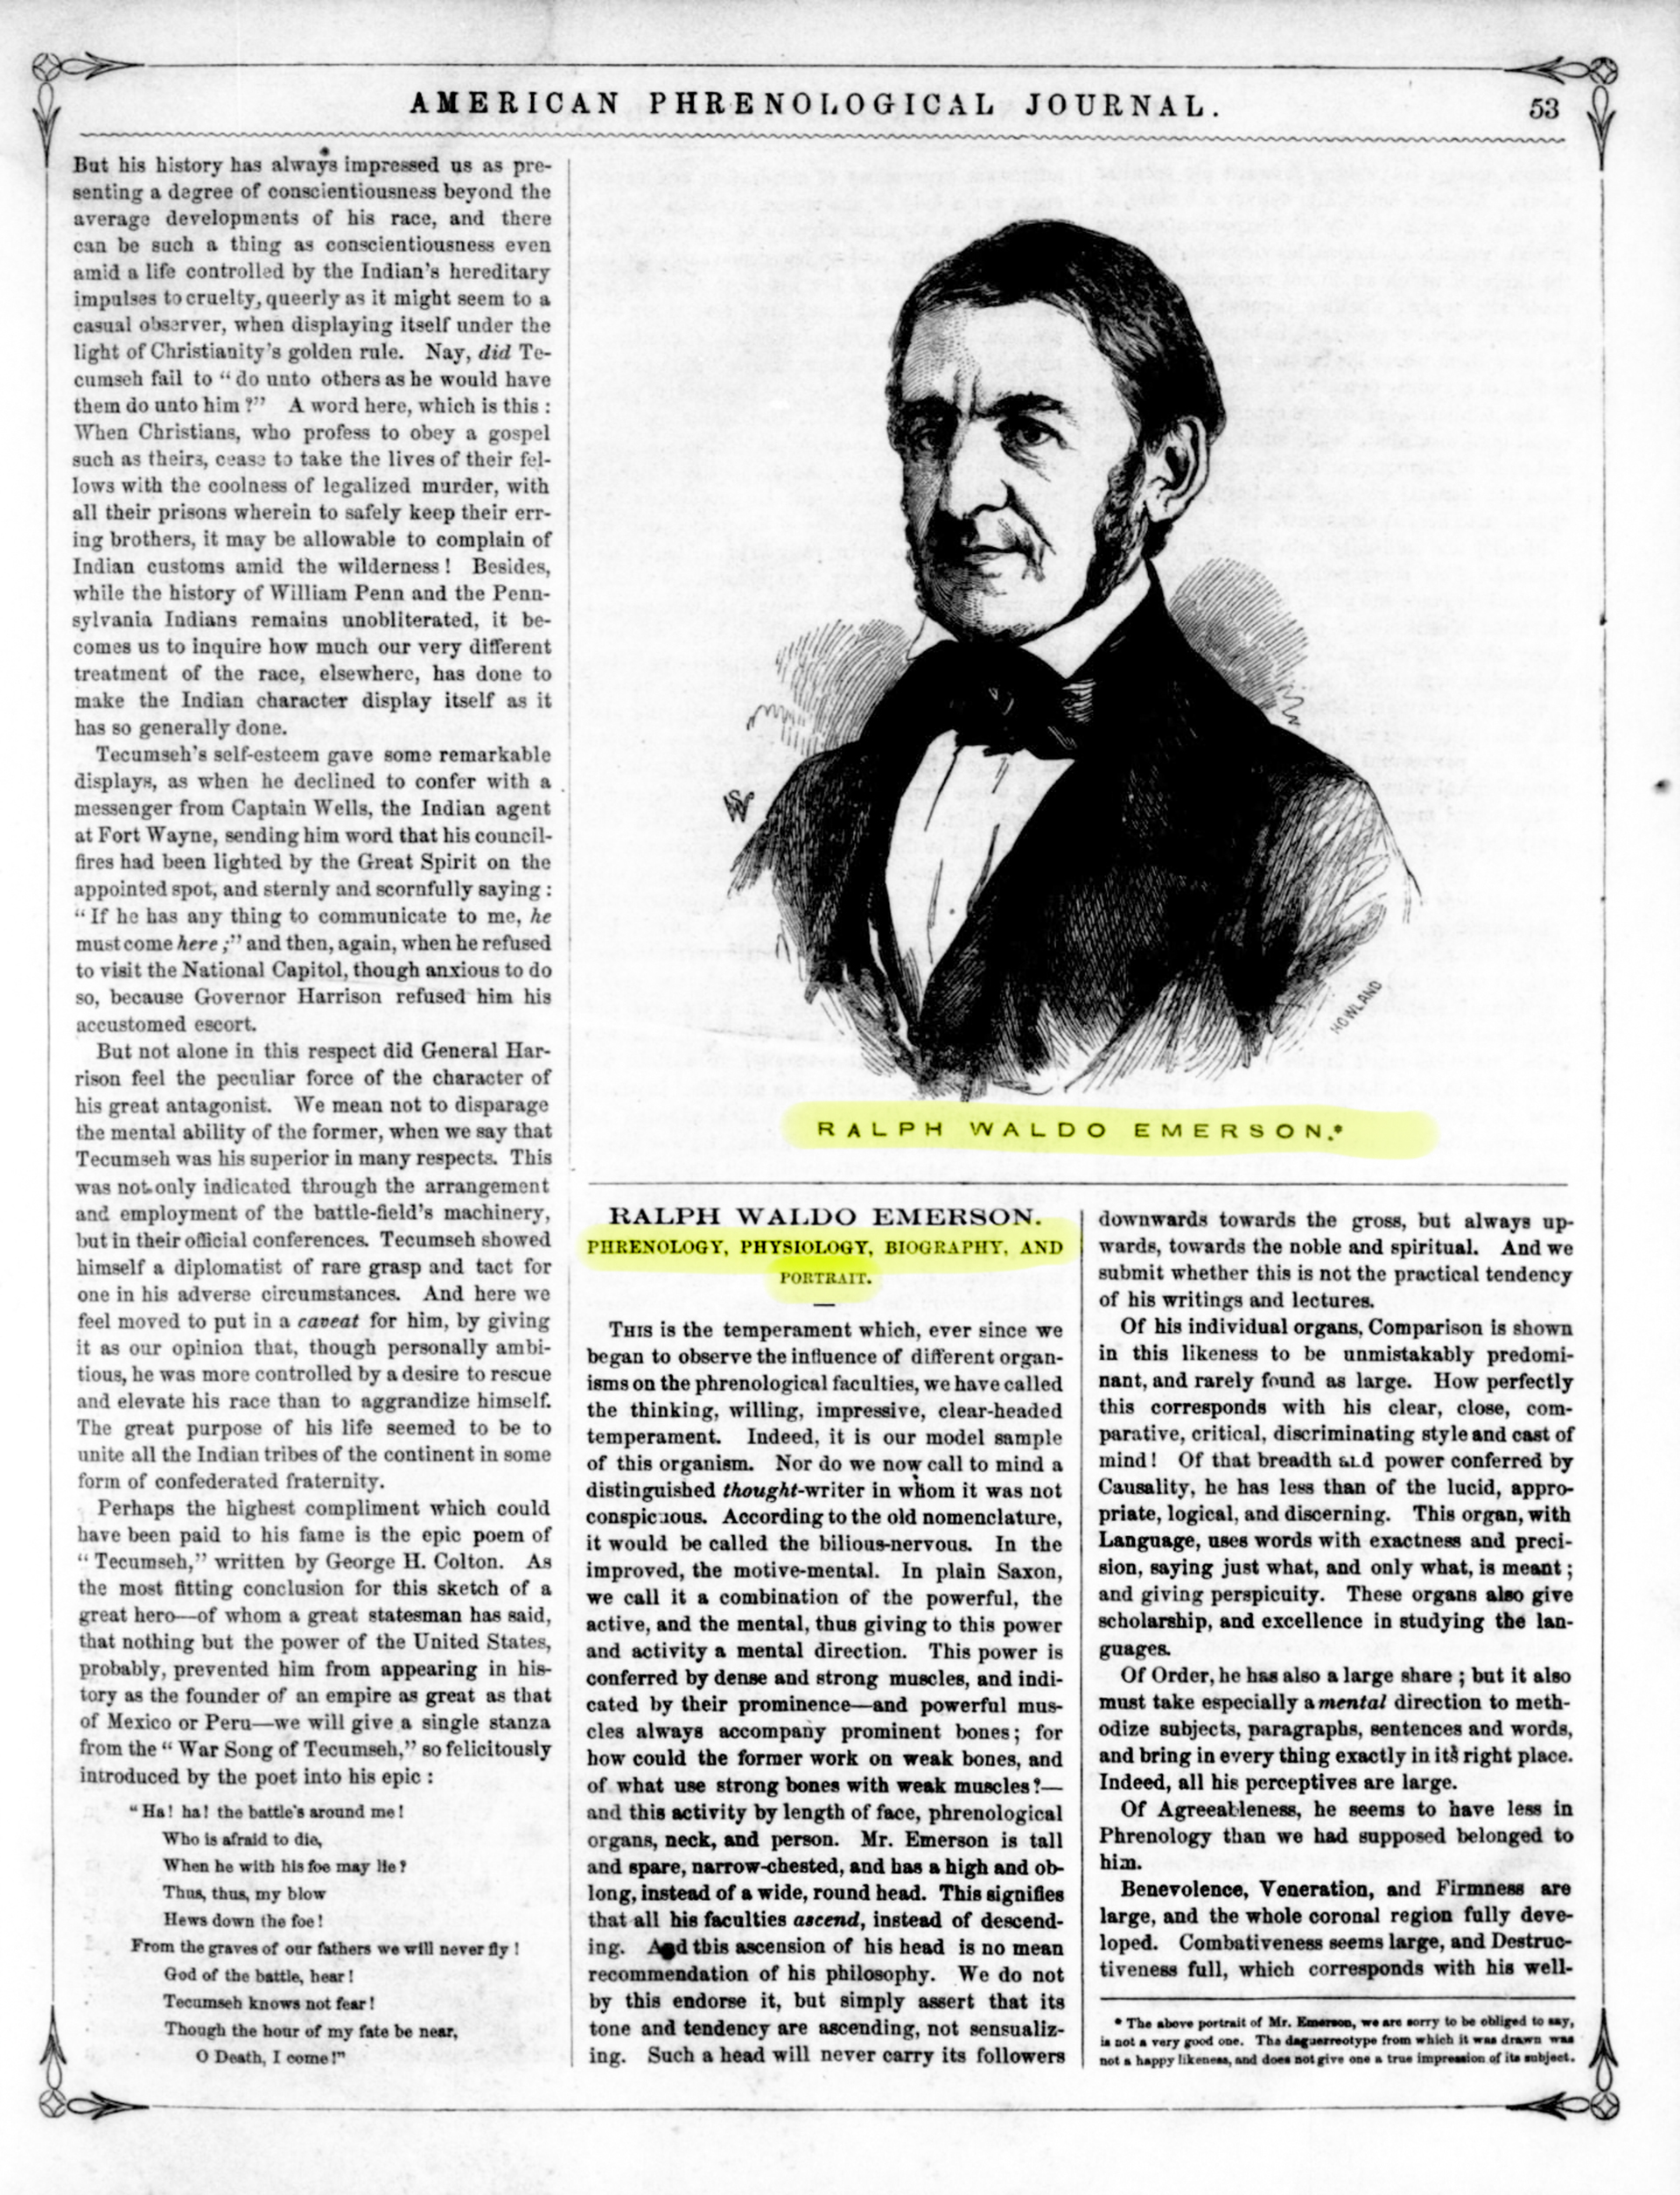 A black and white image of a page from the American Phrenological Journal, with a portrait of Ralph Waldo Emerson. The page is numbered 53 and has three columns of text. The text discusses Ralph Waldo Emerson, a famous American writer and philosopher.